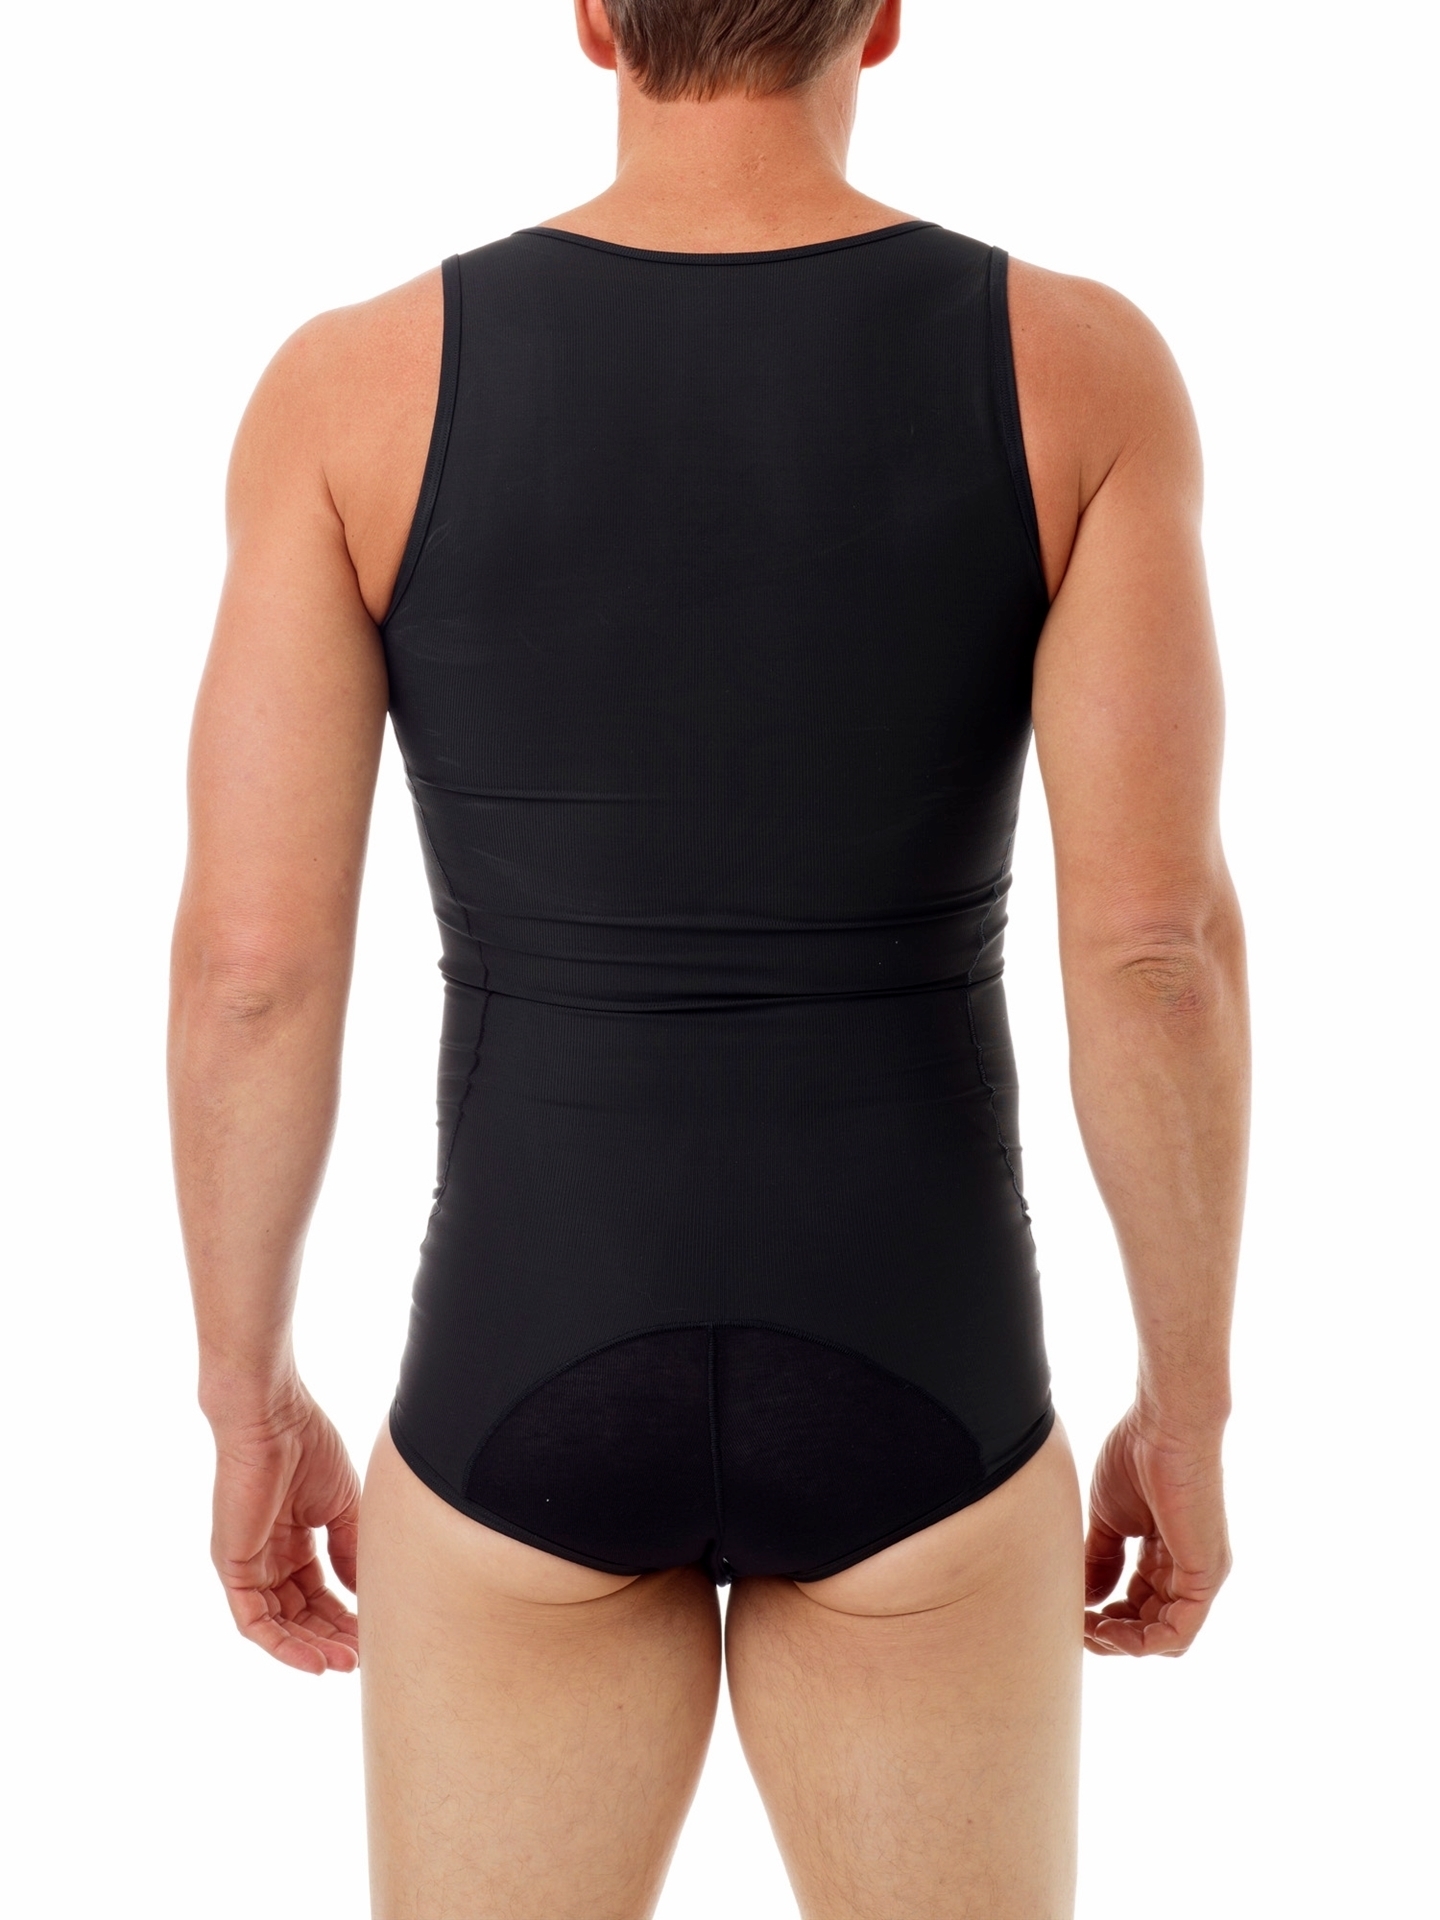 Women's Compression Shirts, Tanks & Tees, Buy Now at Underworks